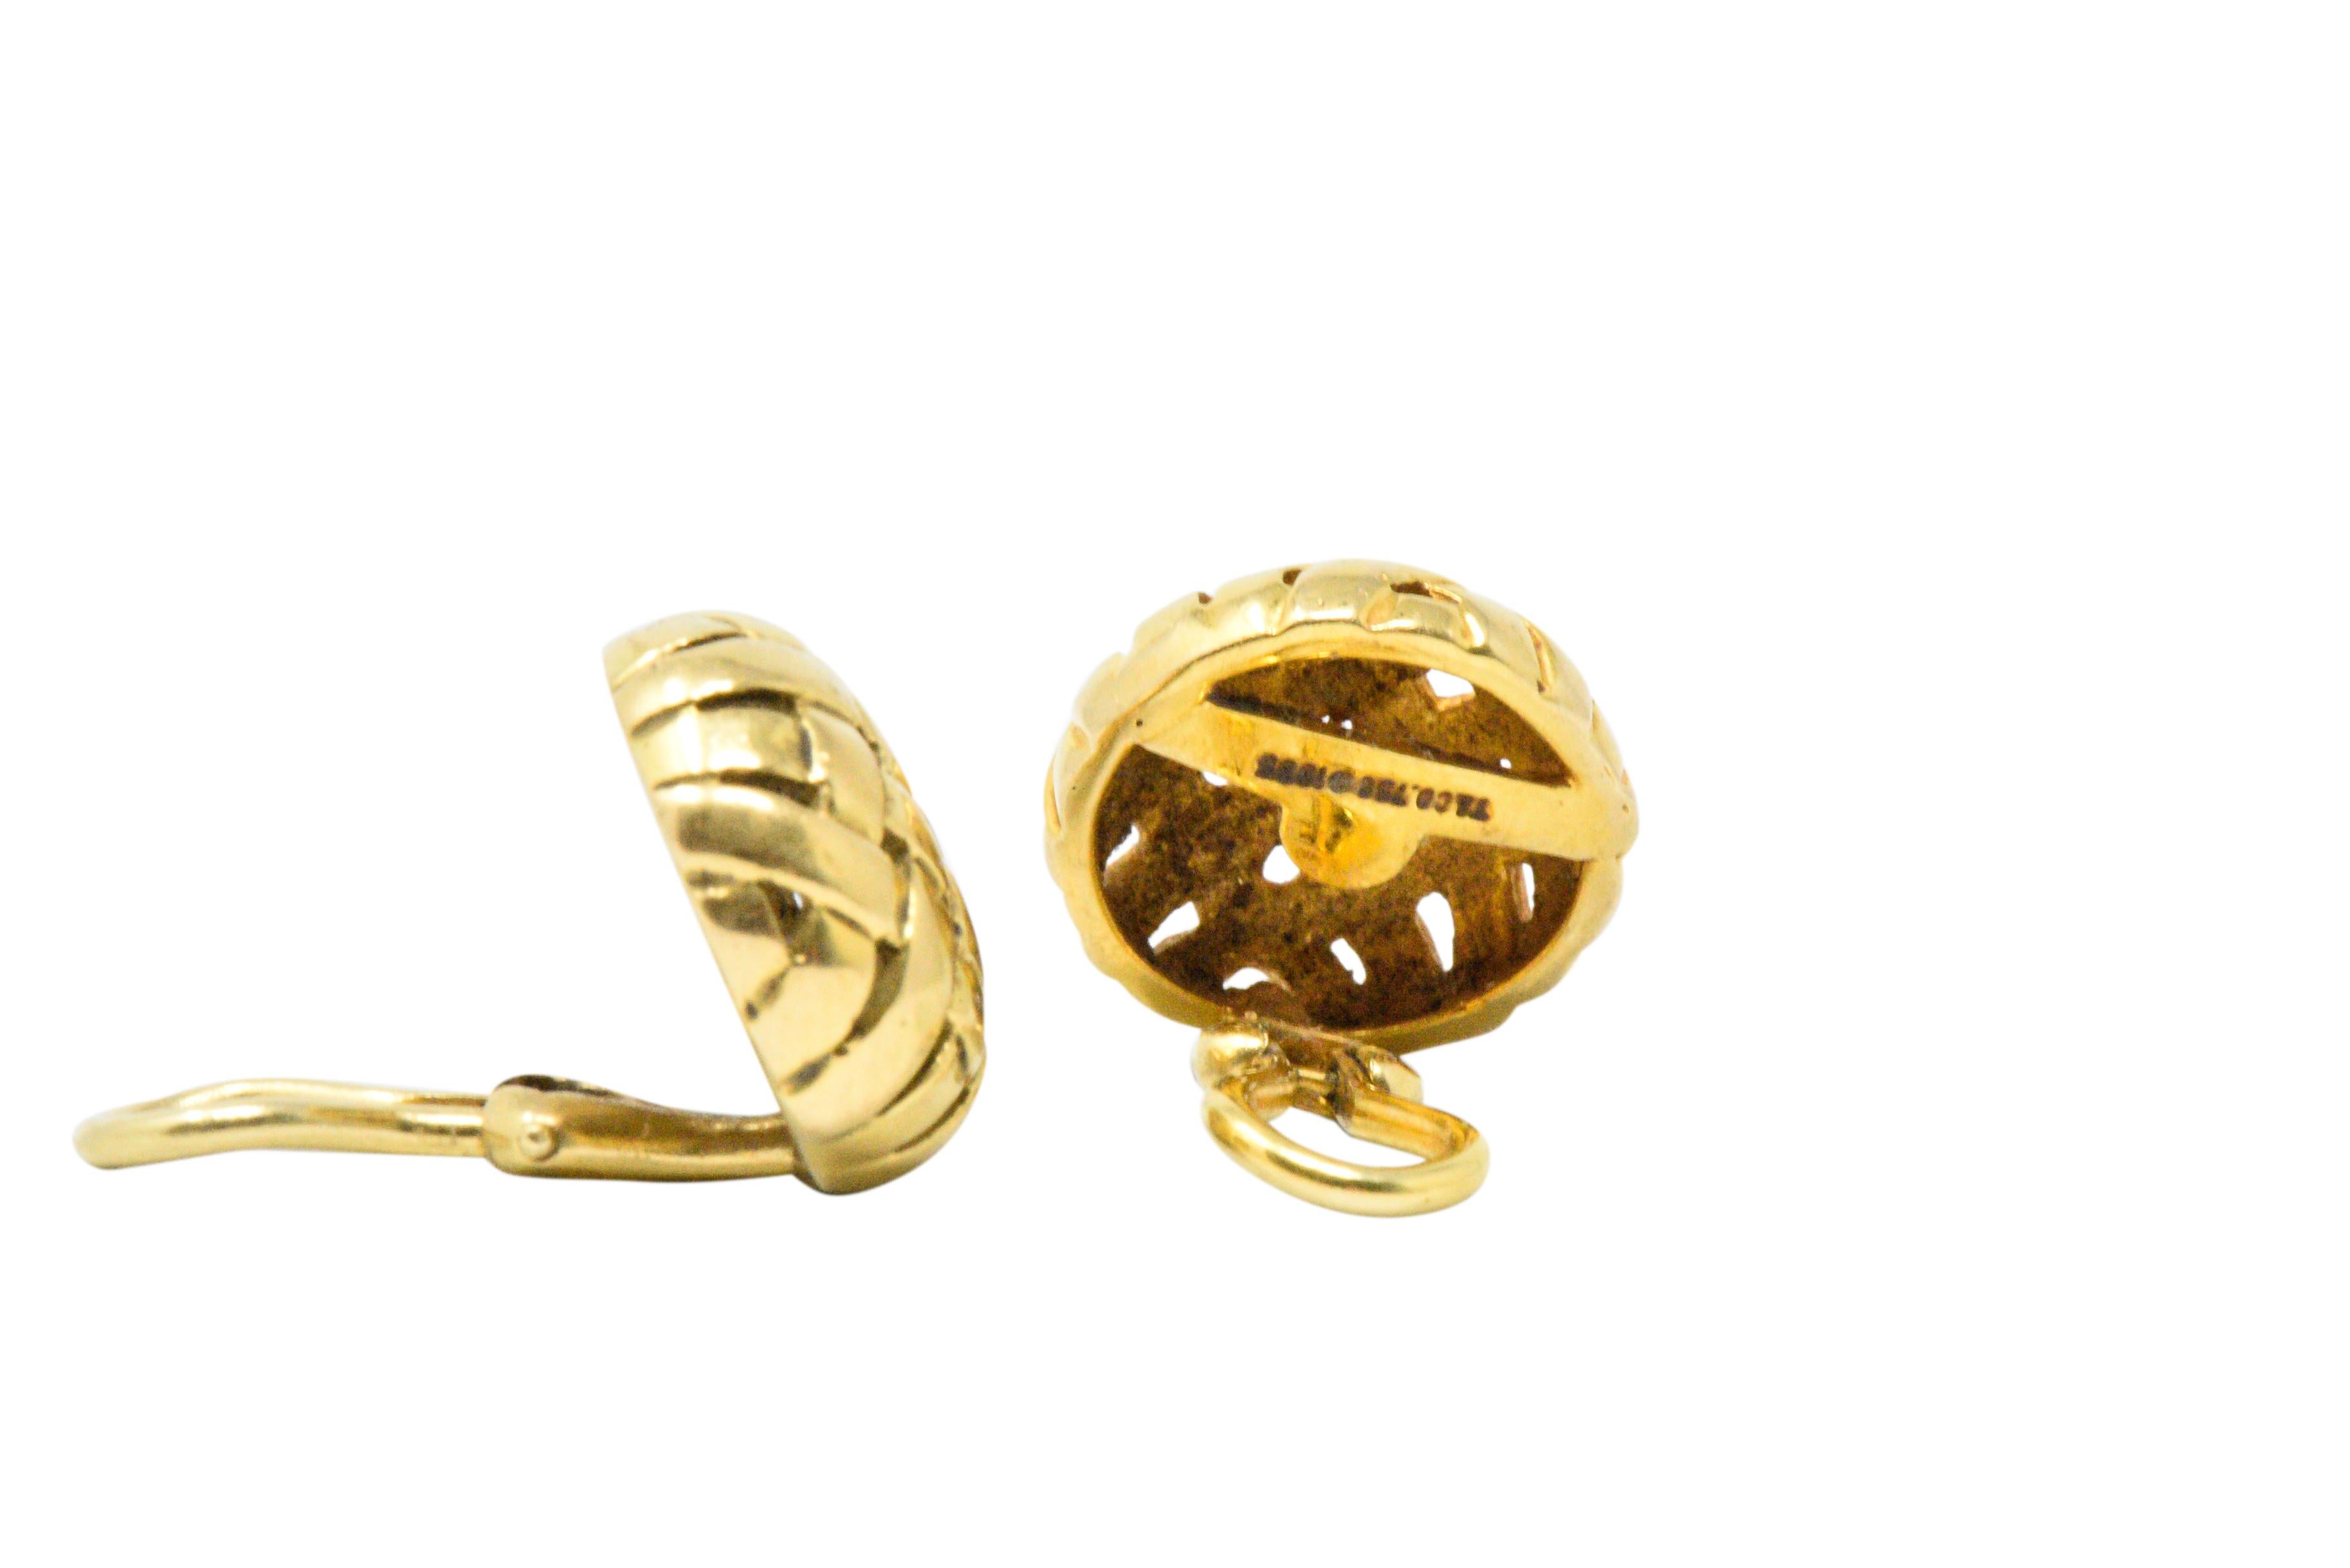 Contemporary Pair of Tiffany & Co. 18 Karat Yellow Gold Woven Button Ear-Clips Earrings, 1995